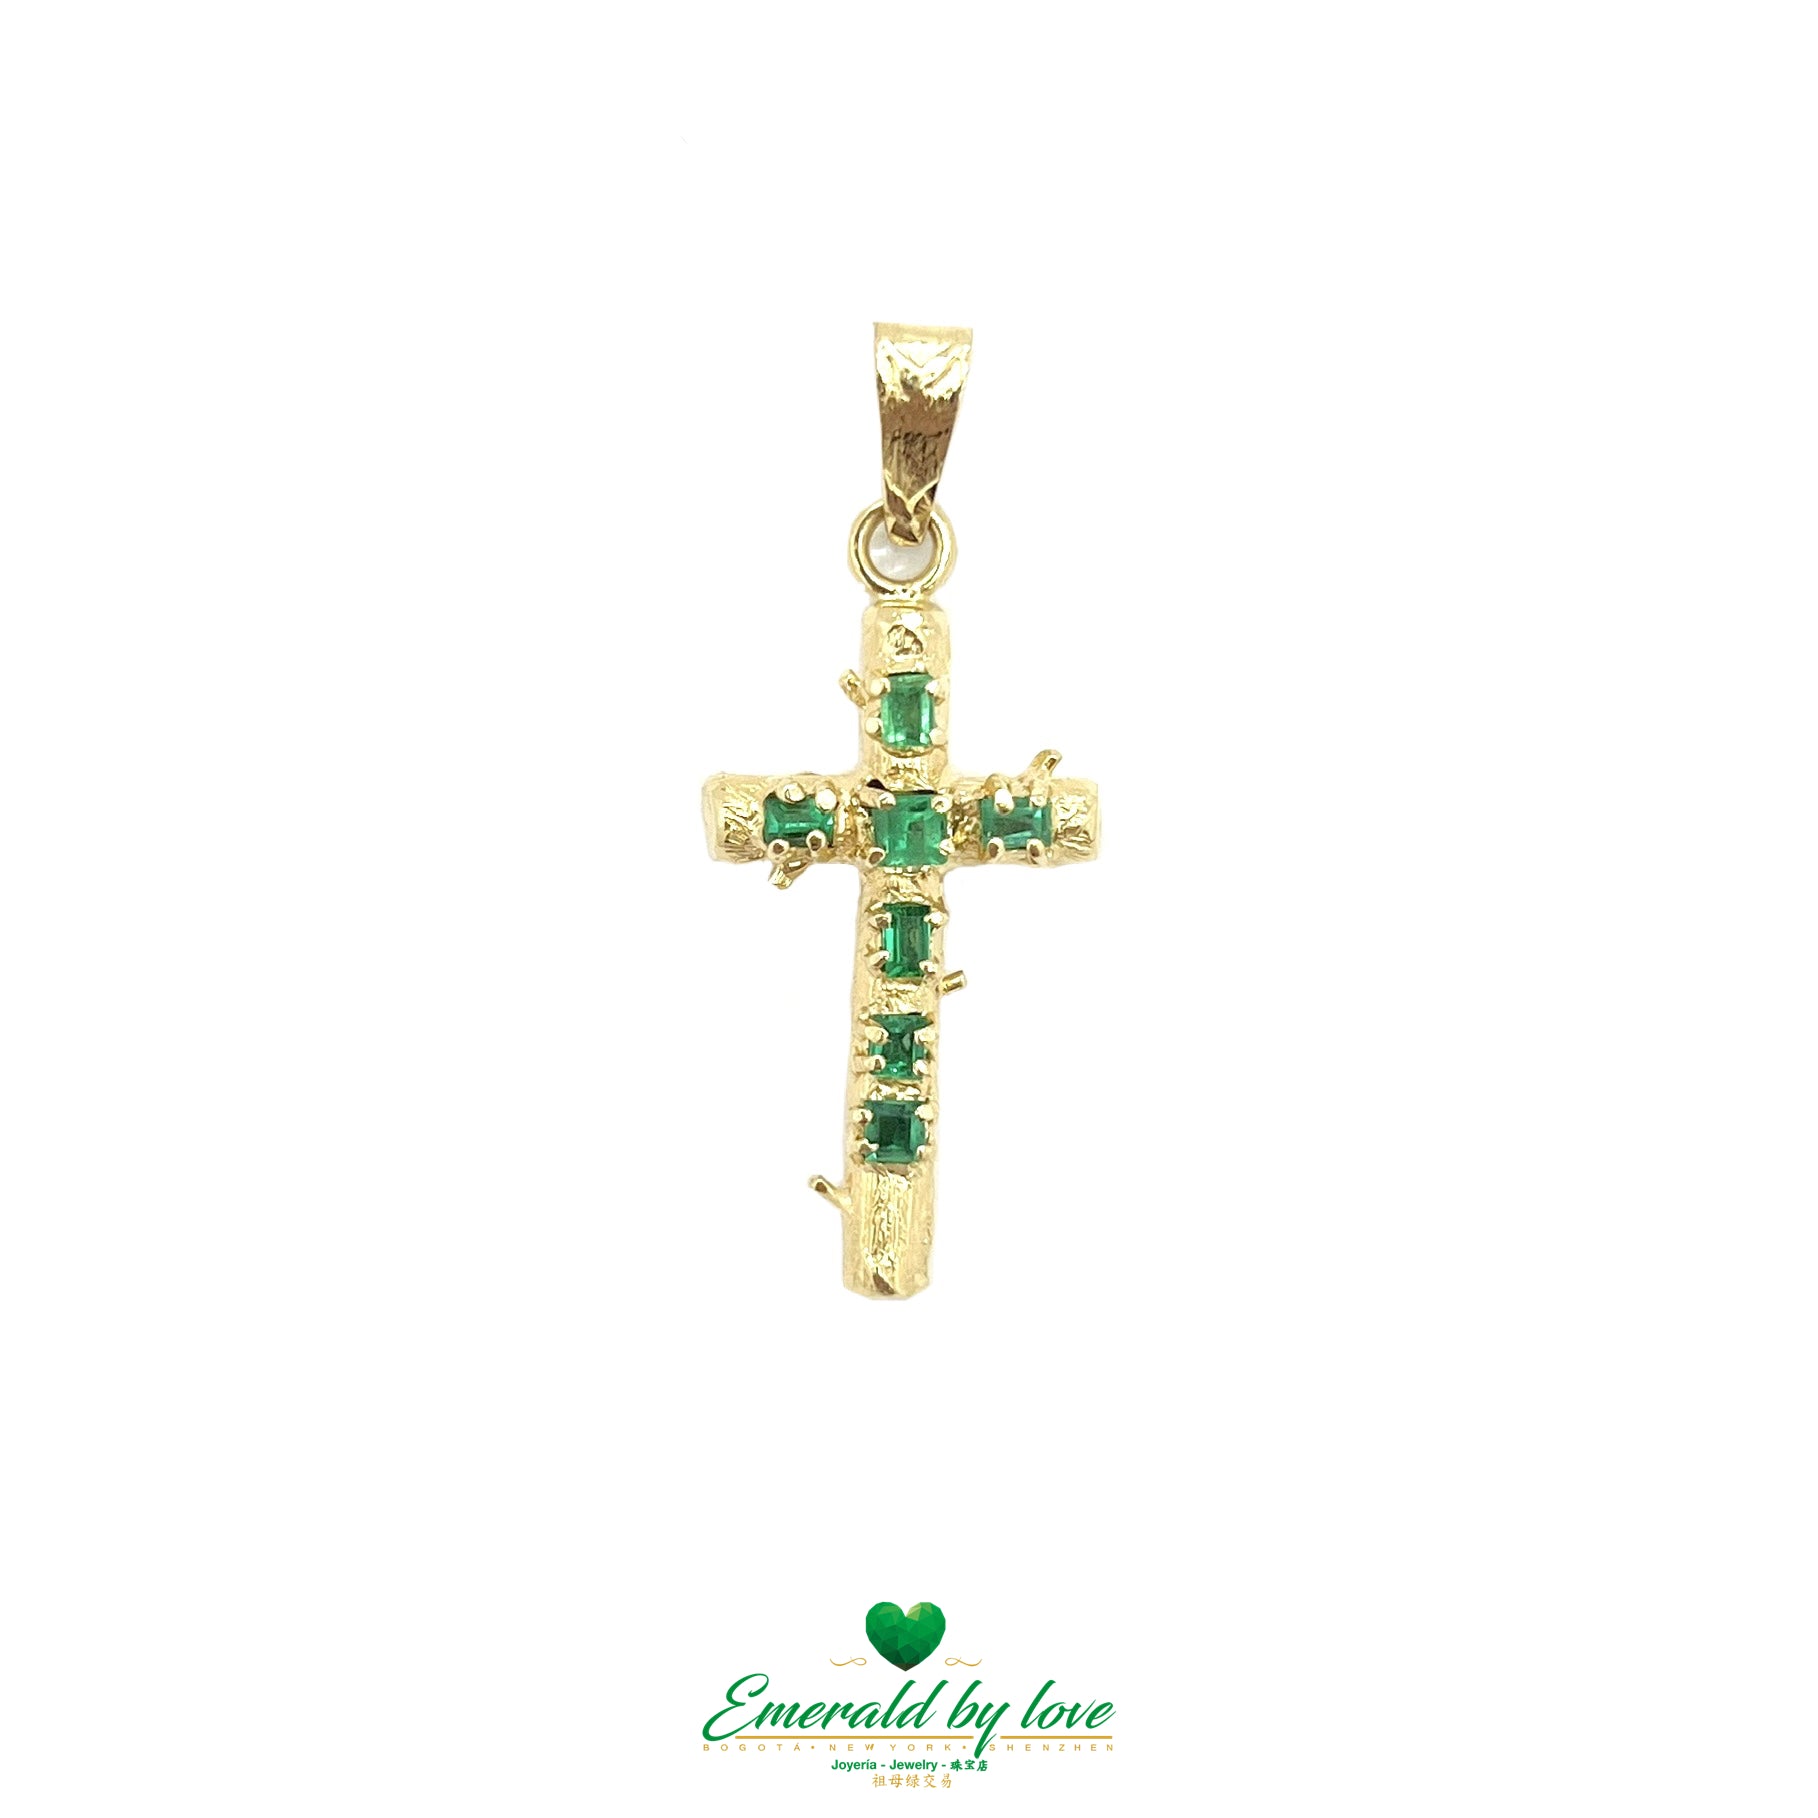 Radiance of Nature: Yellow Gold Cross with Colombian Emeralds